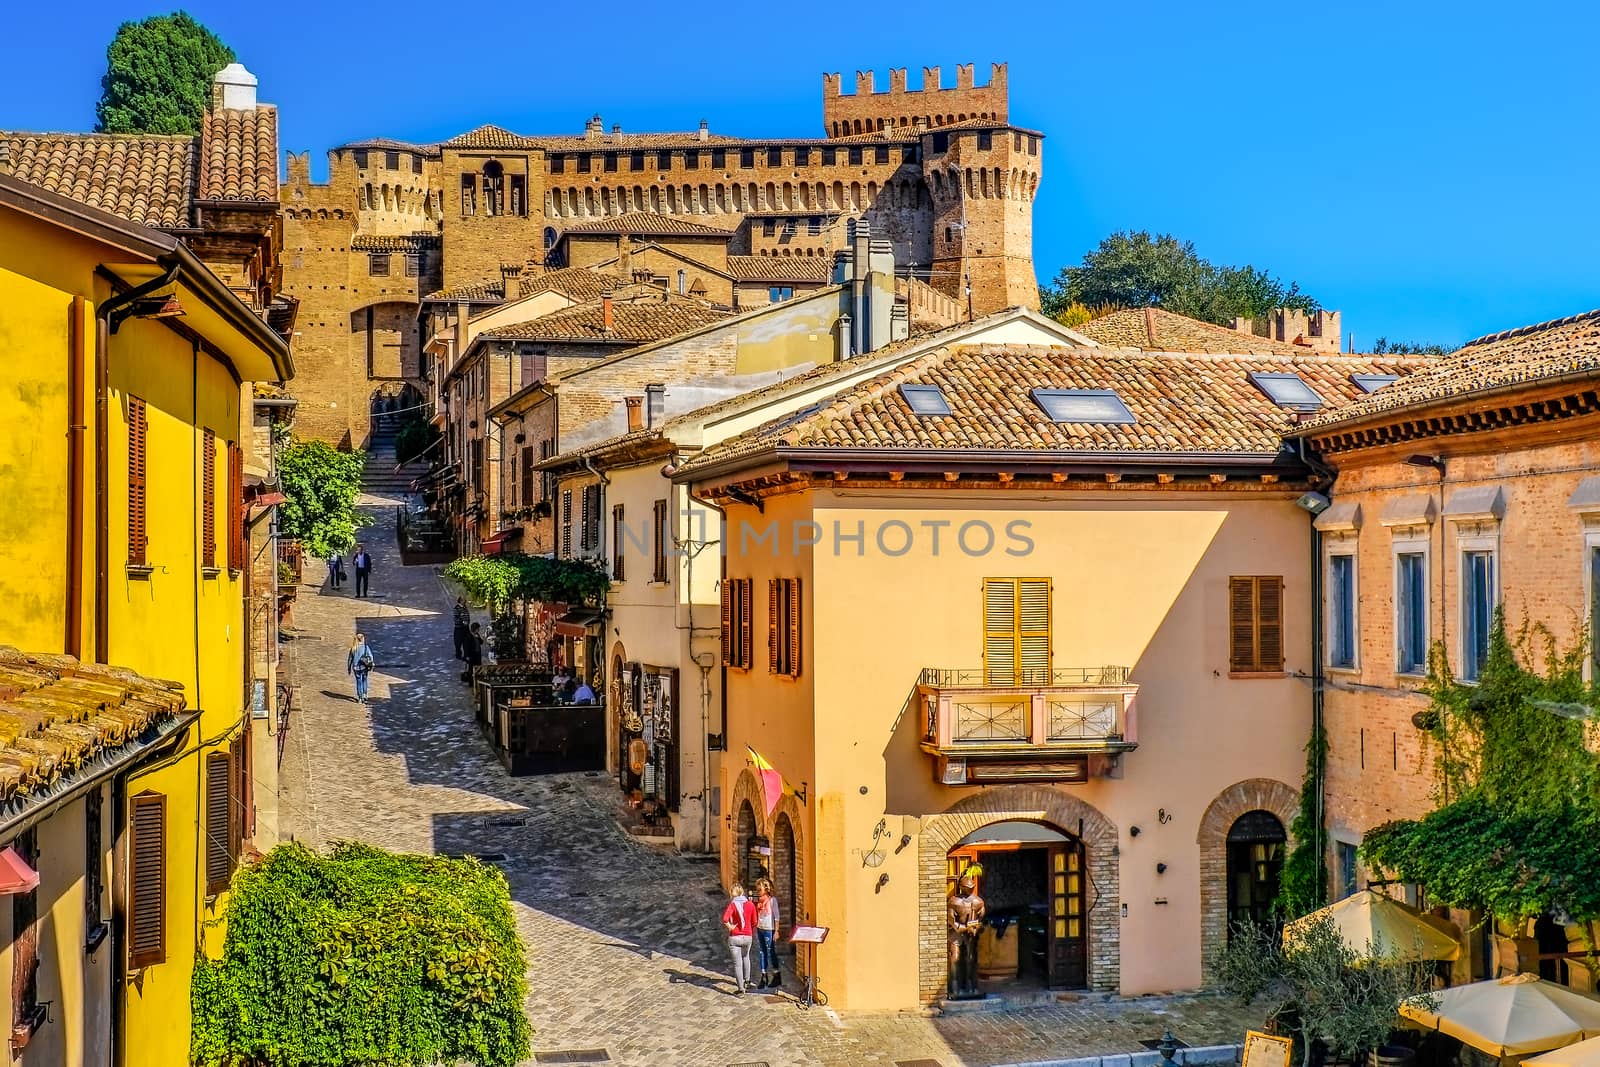 mediaeval town buildings of Gradara italy colorful houses village streets by LucaLorenzelli